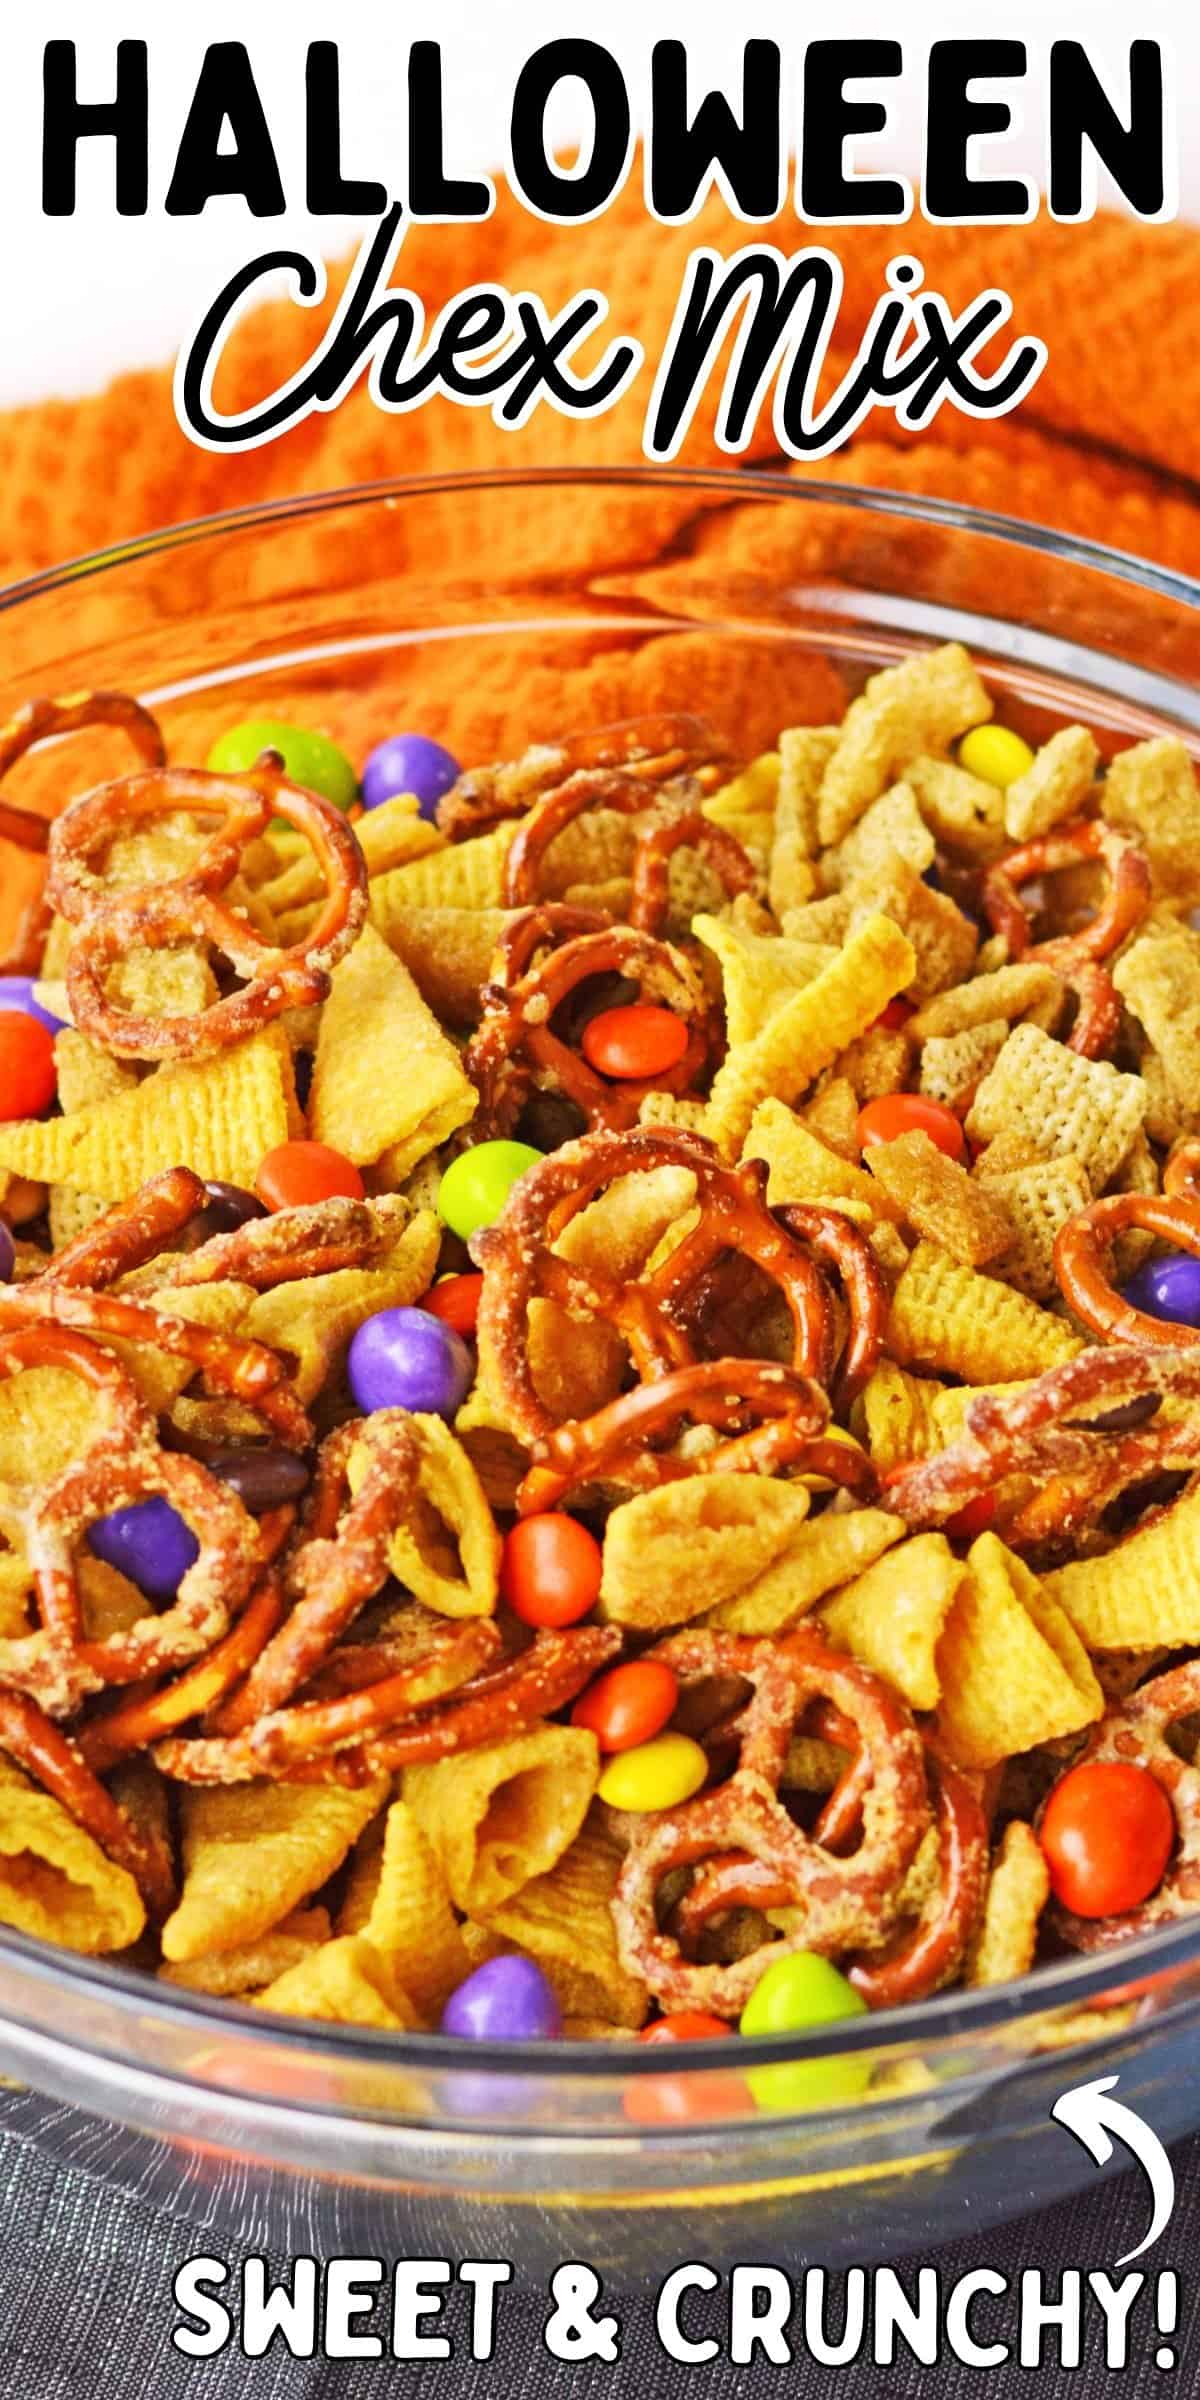 Halloween Chex Mix; Sweet and crunchy!